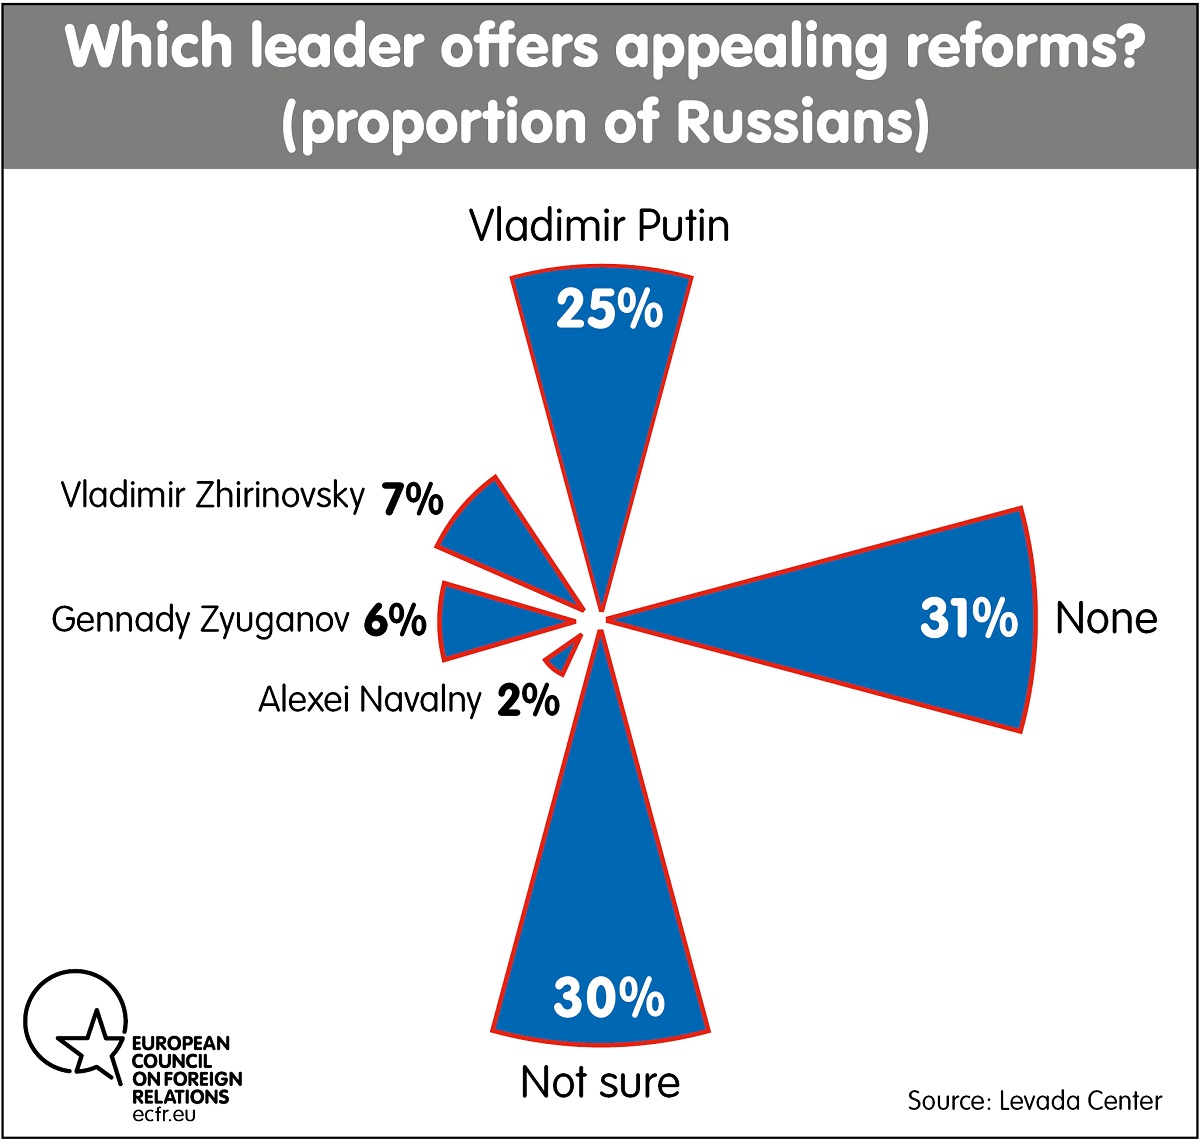 Which leaders offer reforms?